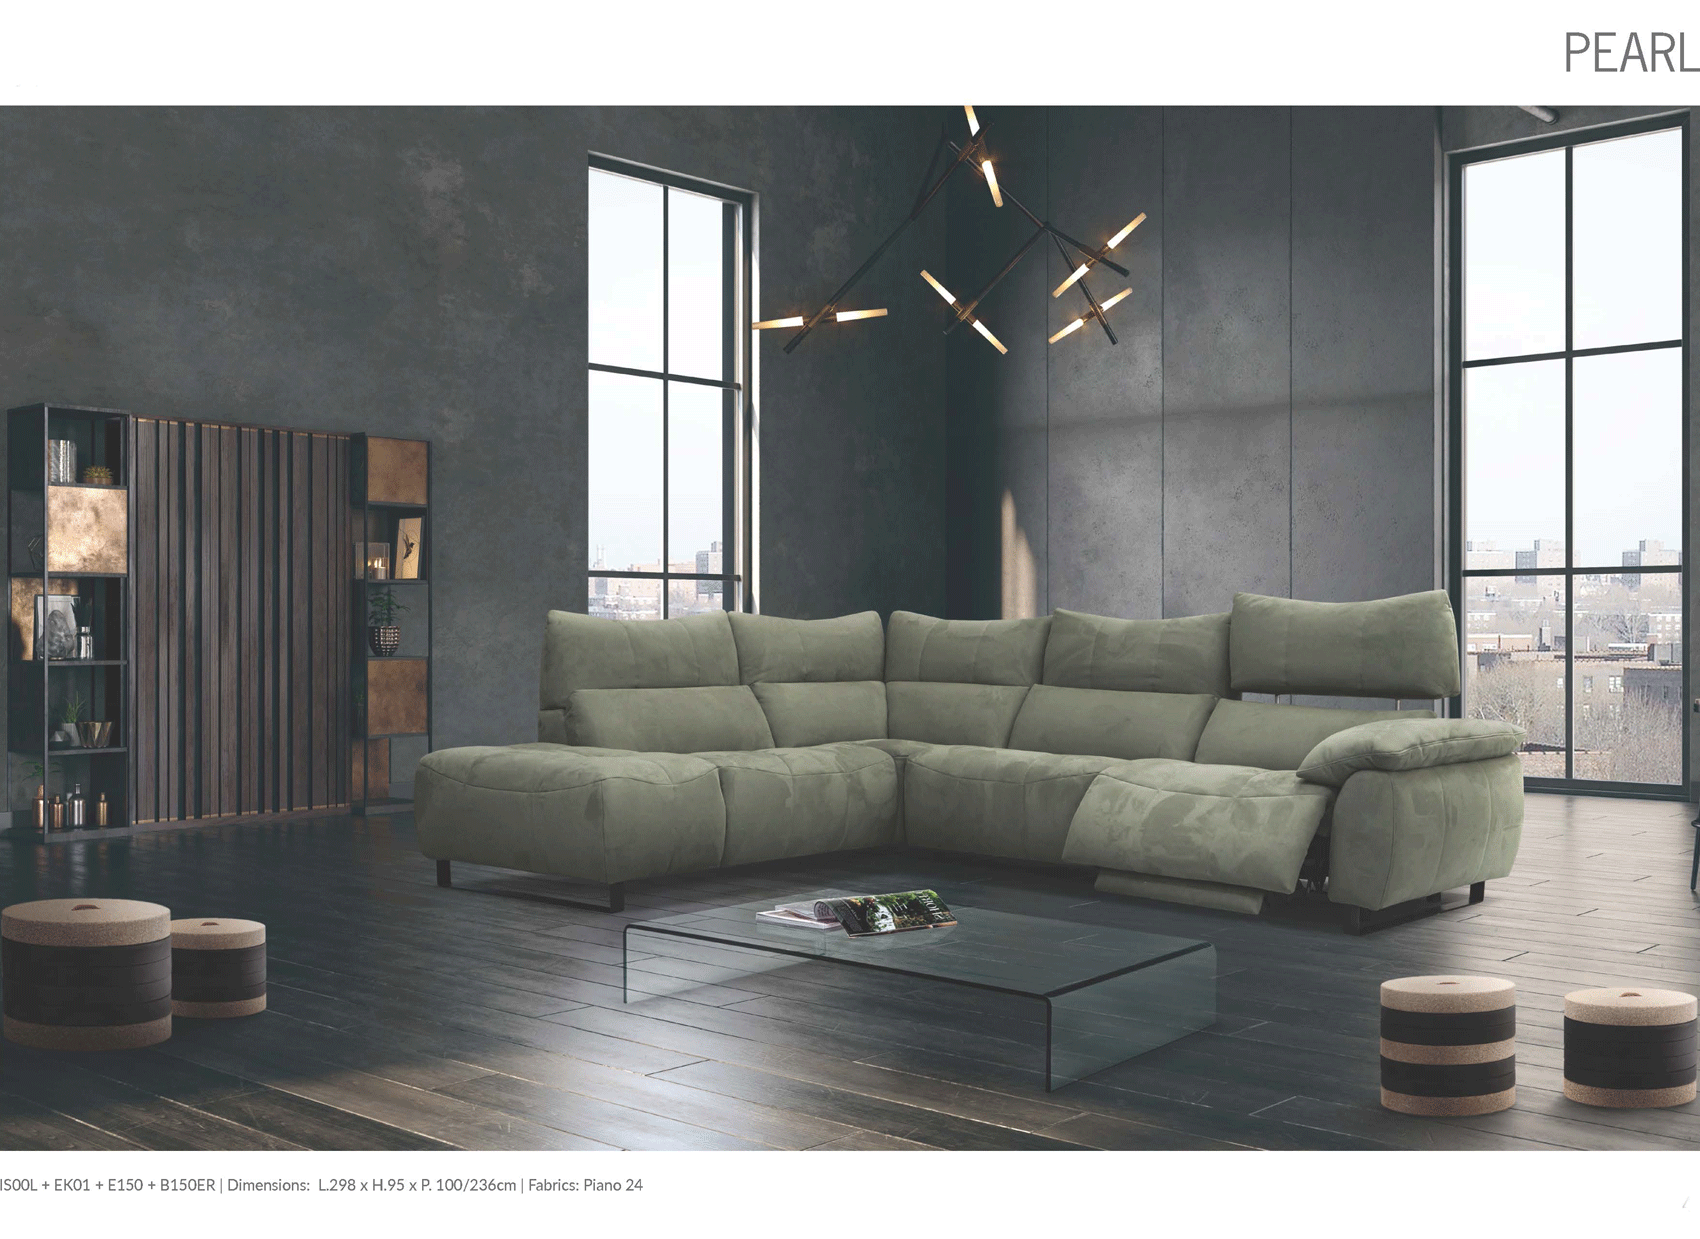 Brands European Living Collection Pearl Sectional